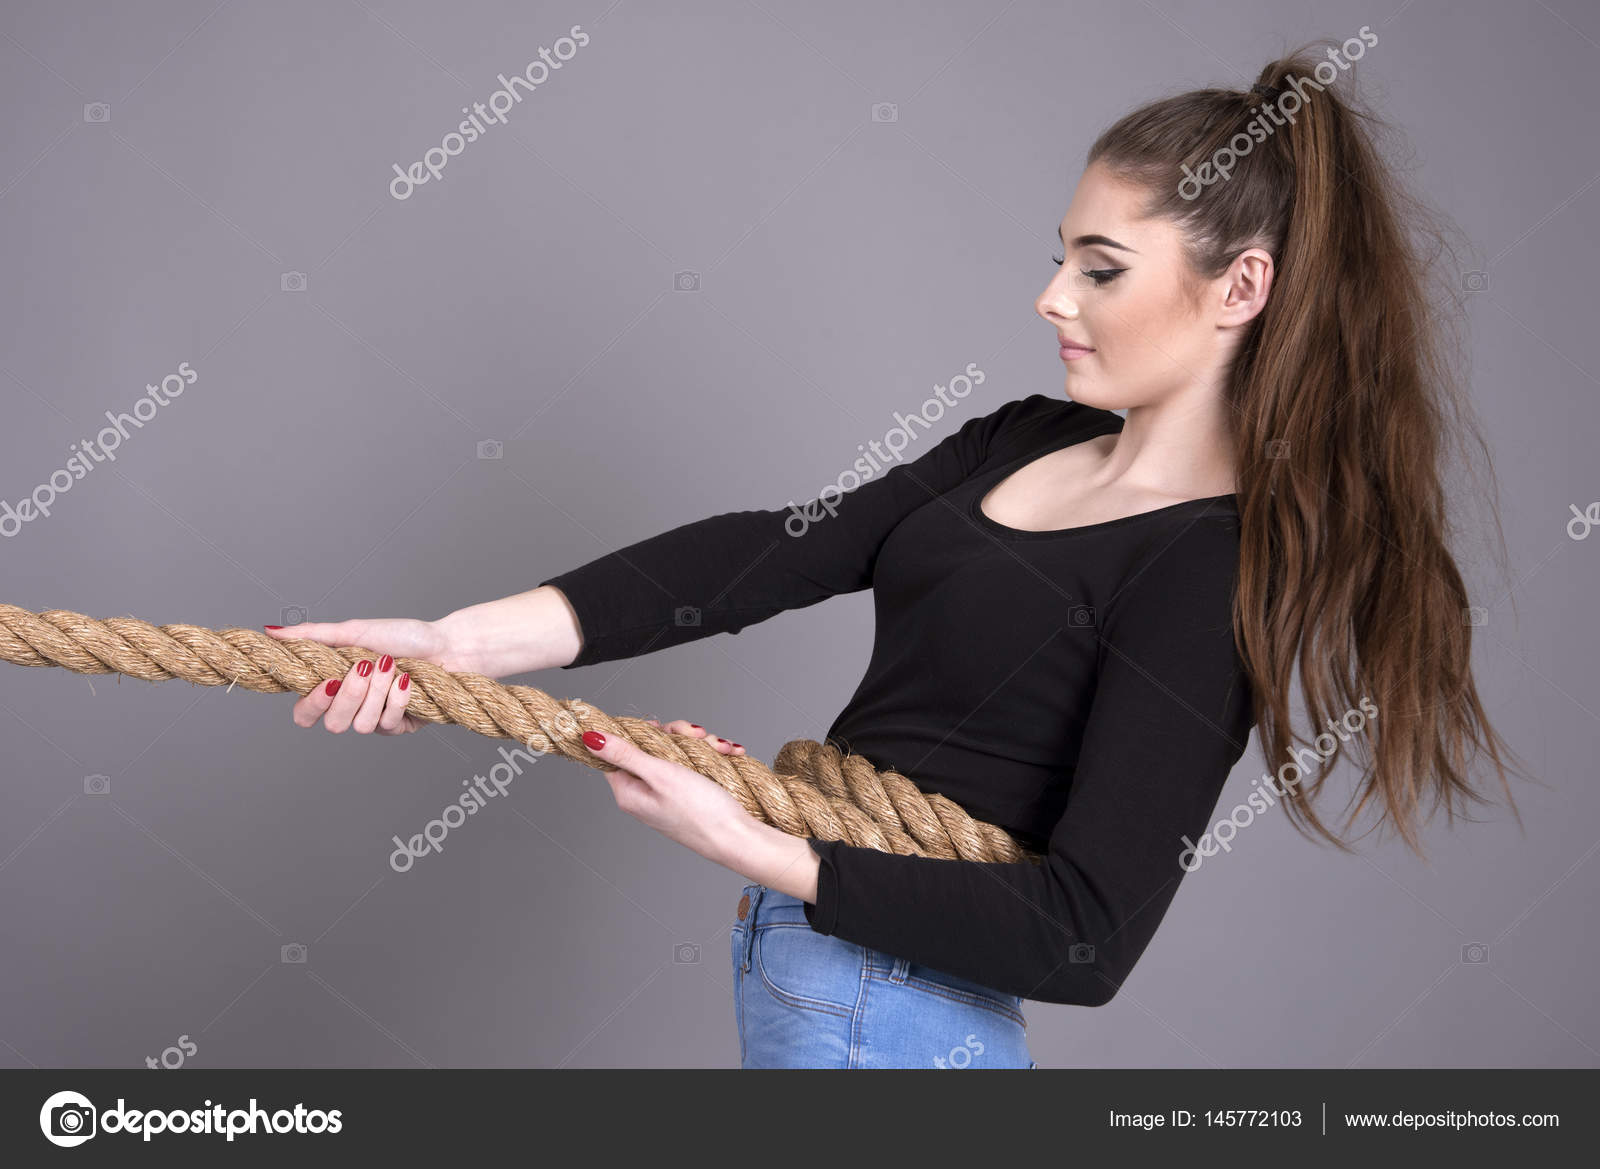 Tug of war concept with girl pulling a rope — Stock Photo © petertt  #145772103